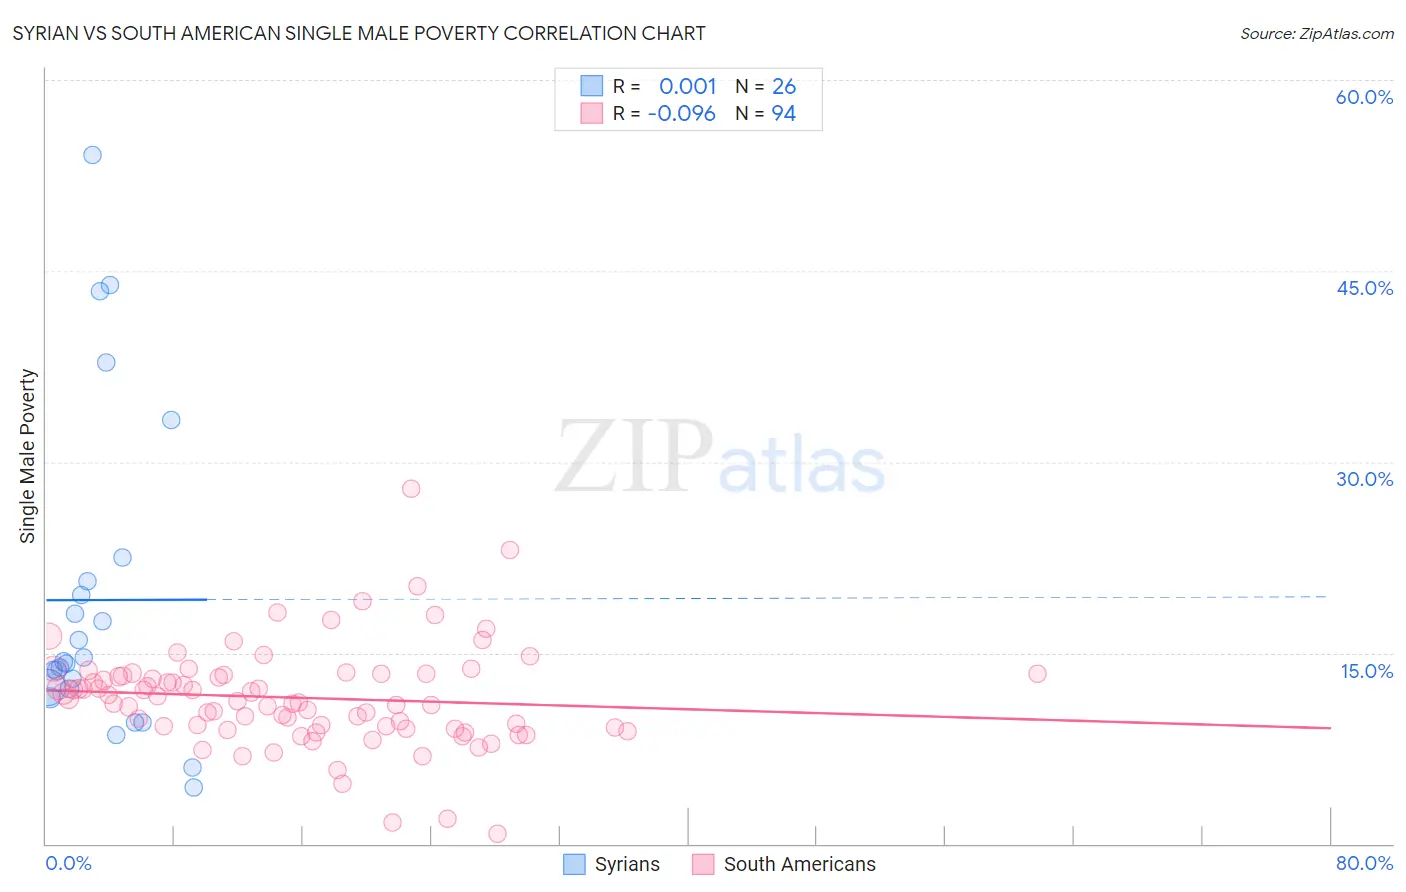 Syrian vs South American Single Male Poverty